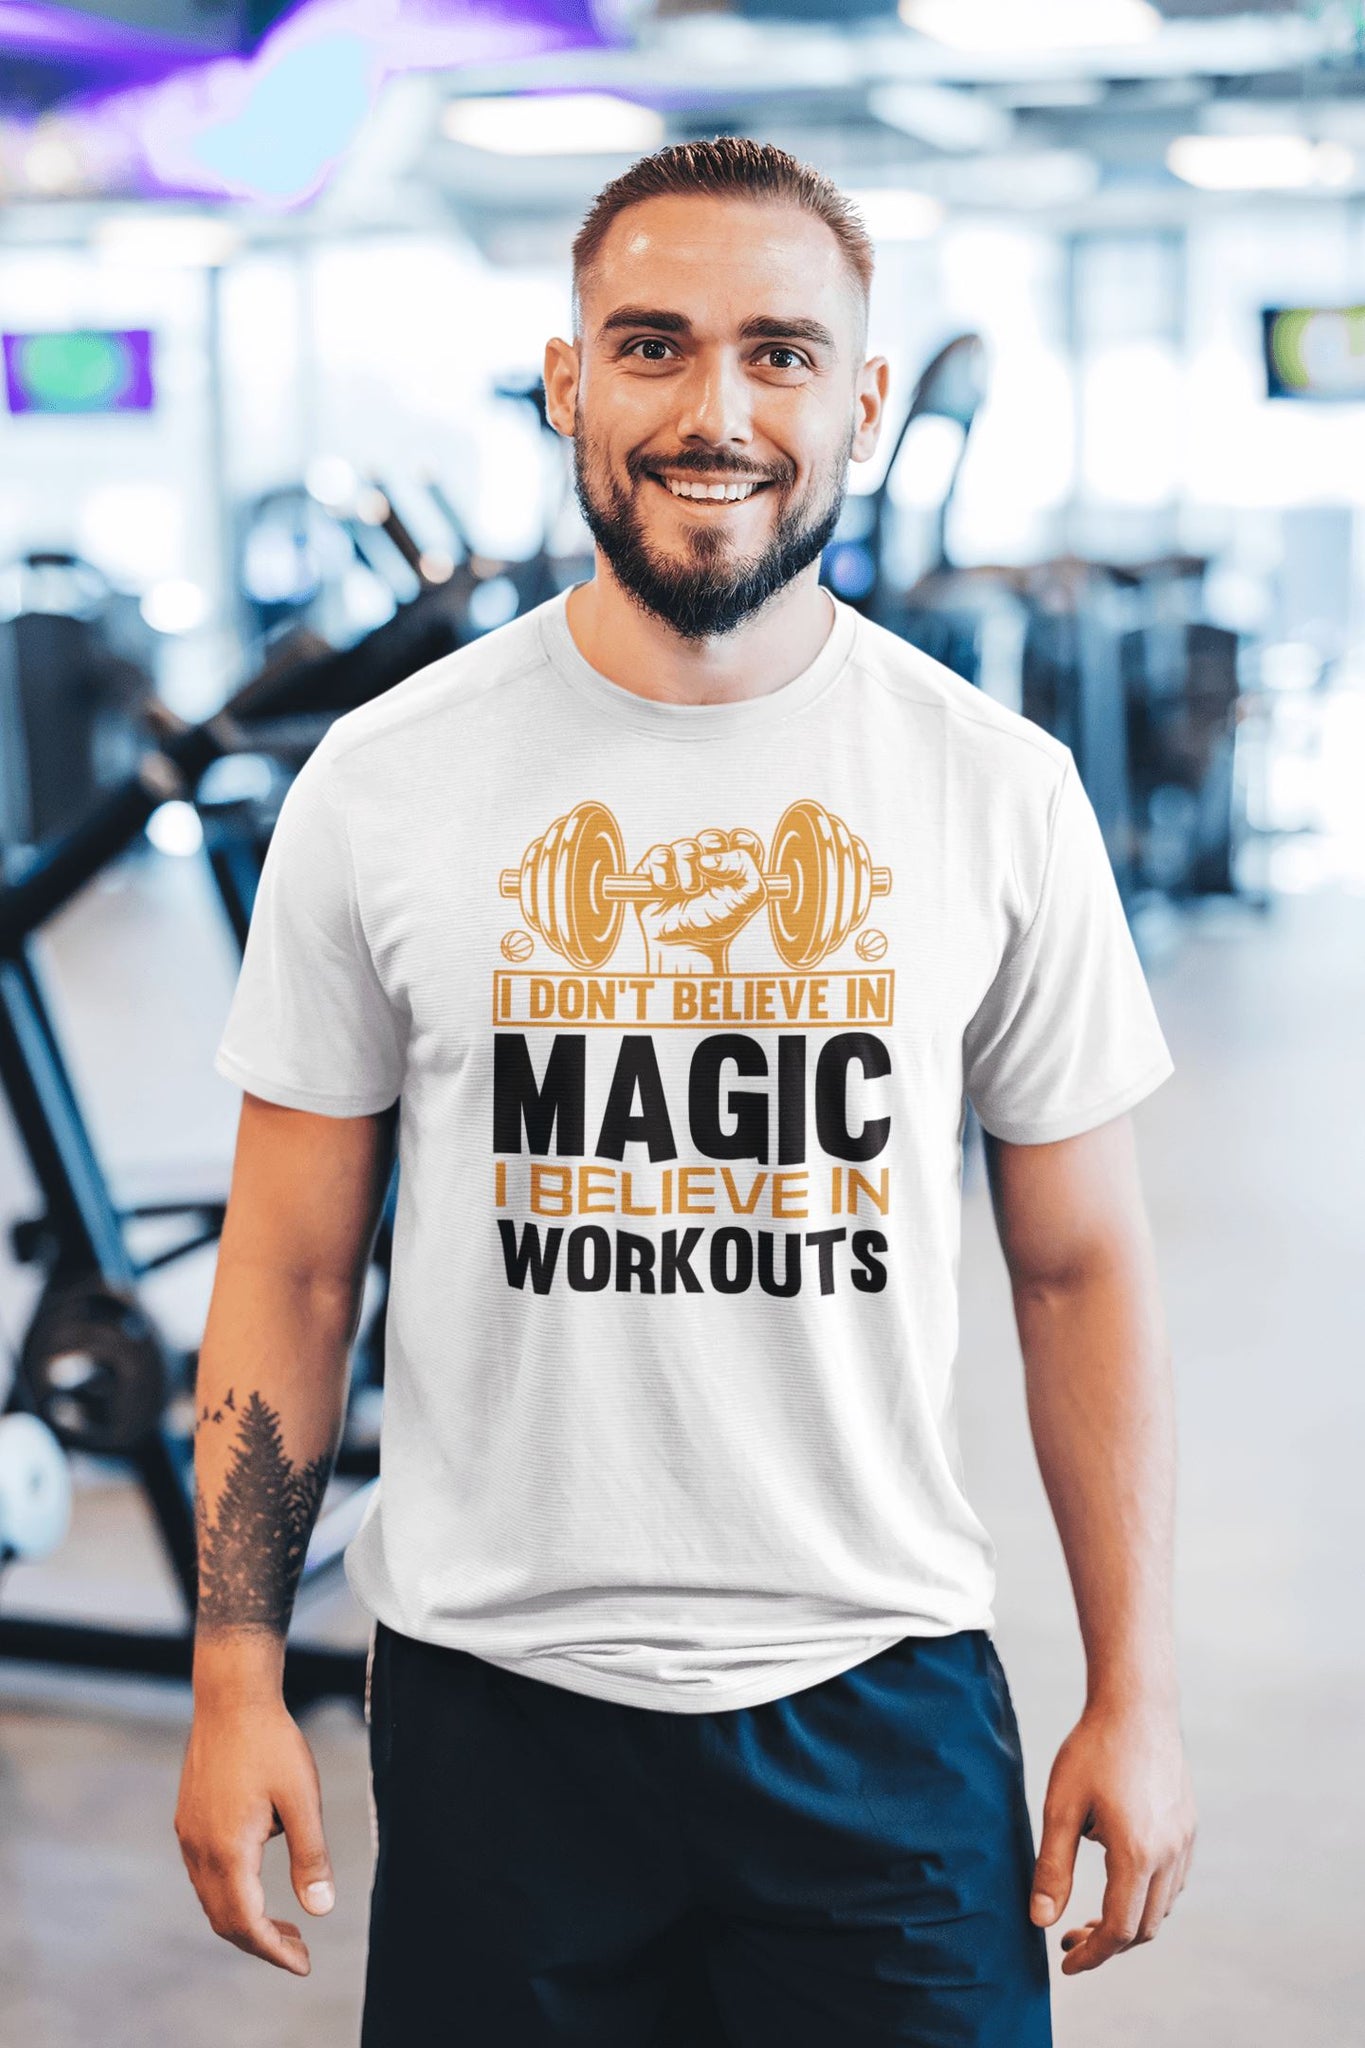 I Don't Believe in Magic I Believe in Workouts Exclusive White T Shirt for Men and Women - Catch My Drift India  activewear, clothing, general, gym, made in india, motivation, shirt, t shirt,